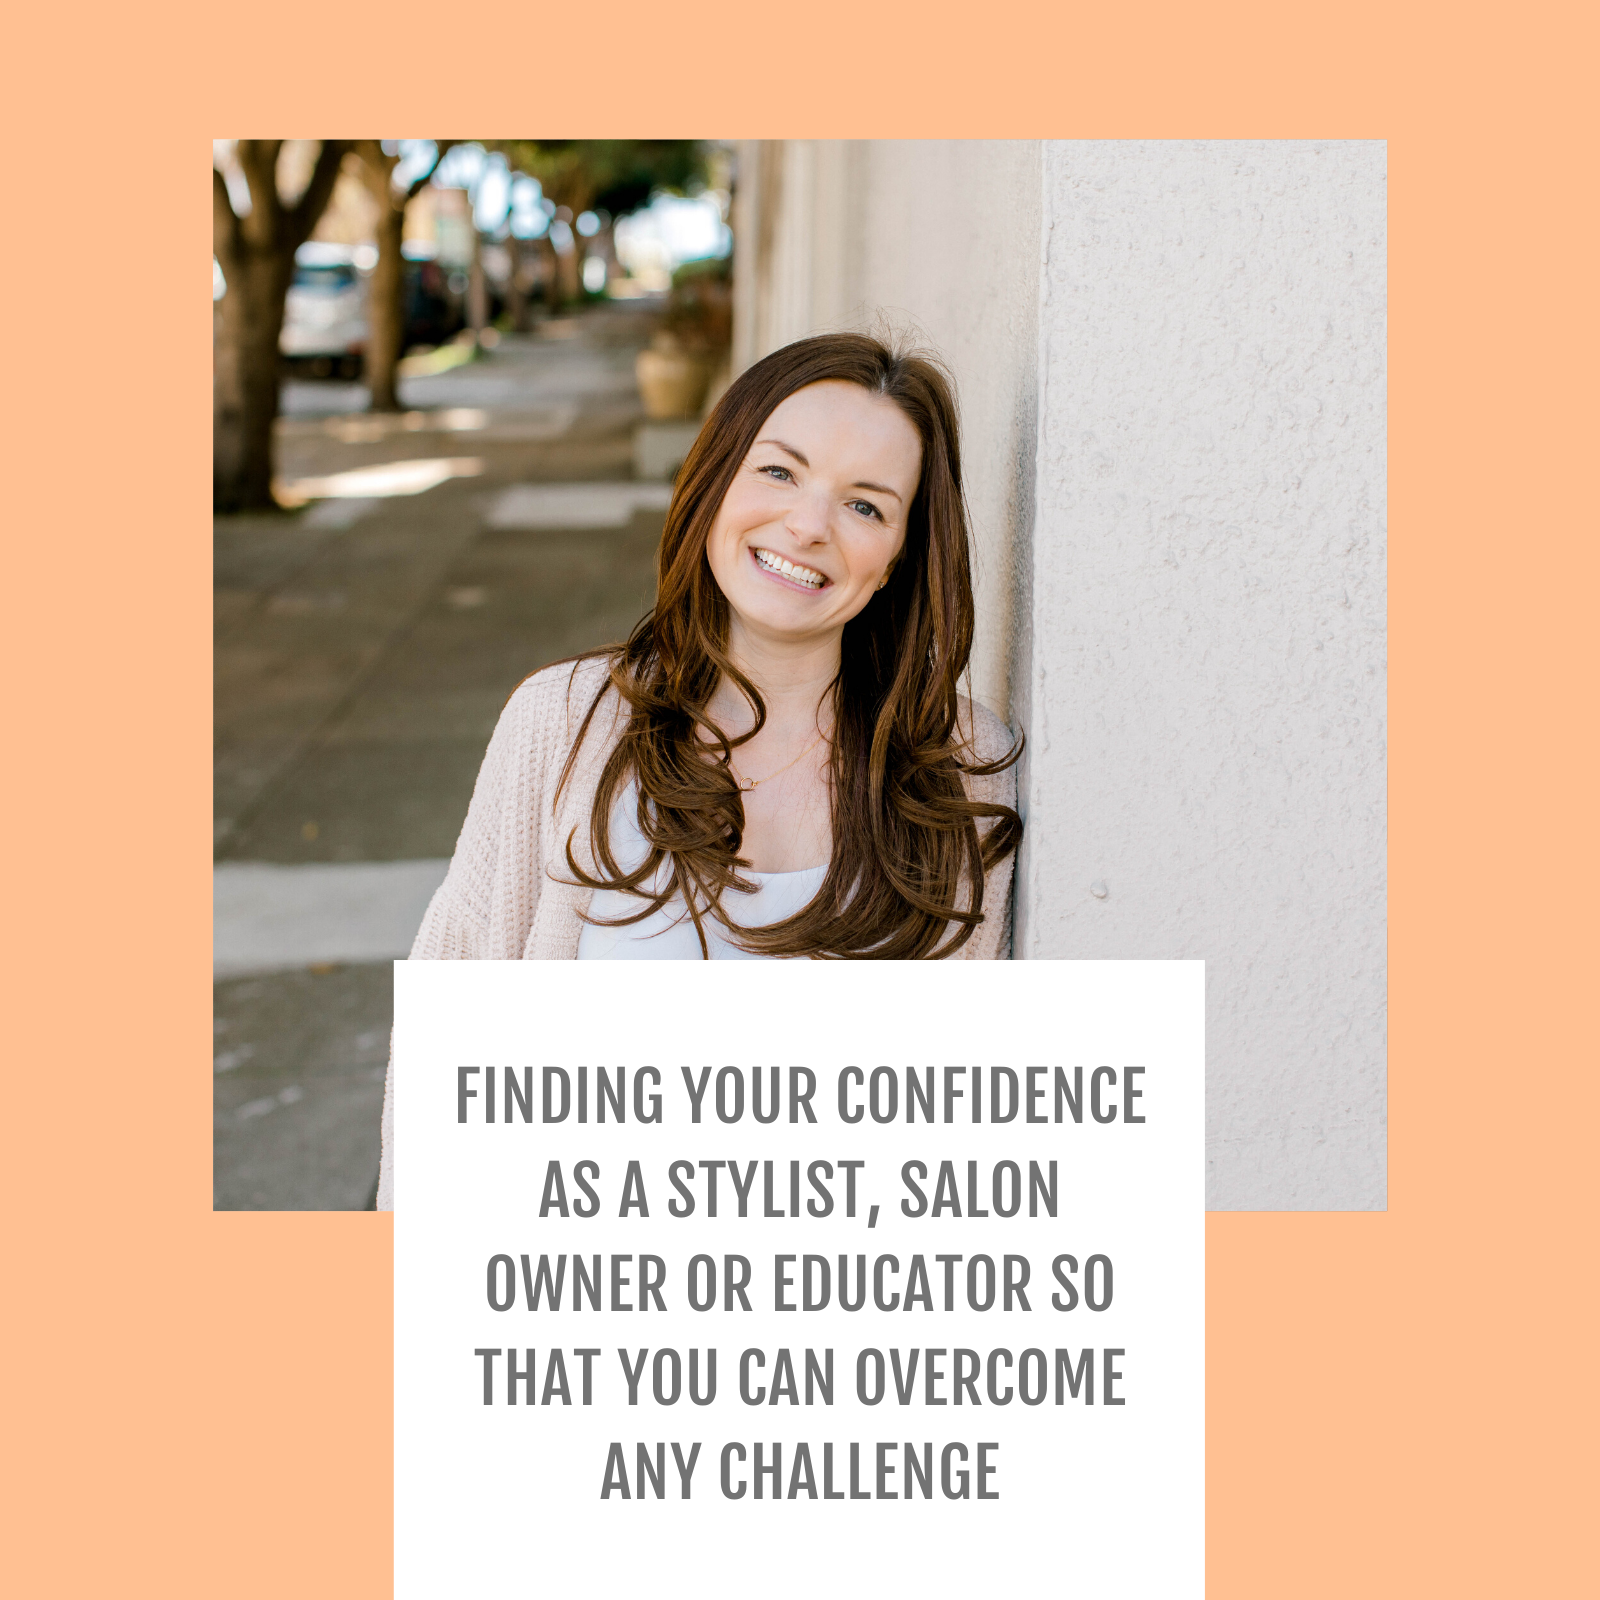 Episode #008: Finding your confidence as a stylist, salon owner or educator so that you can overcome any challenge